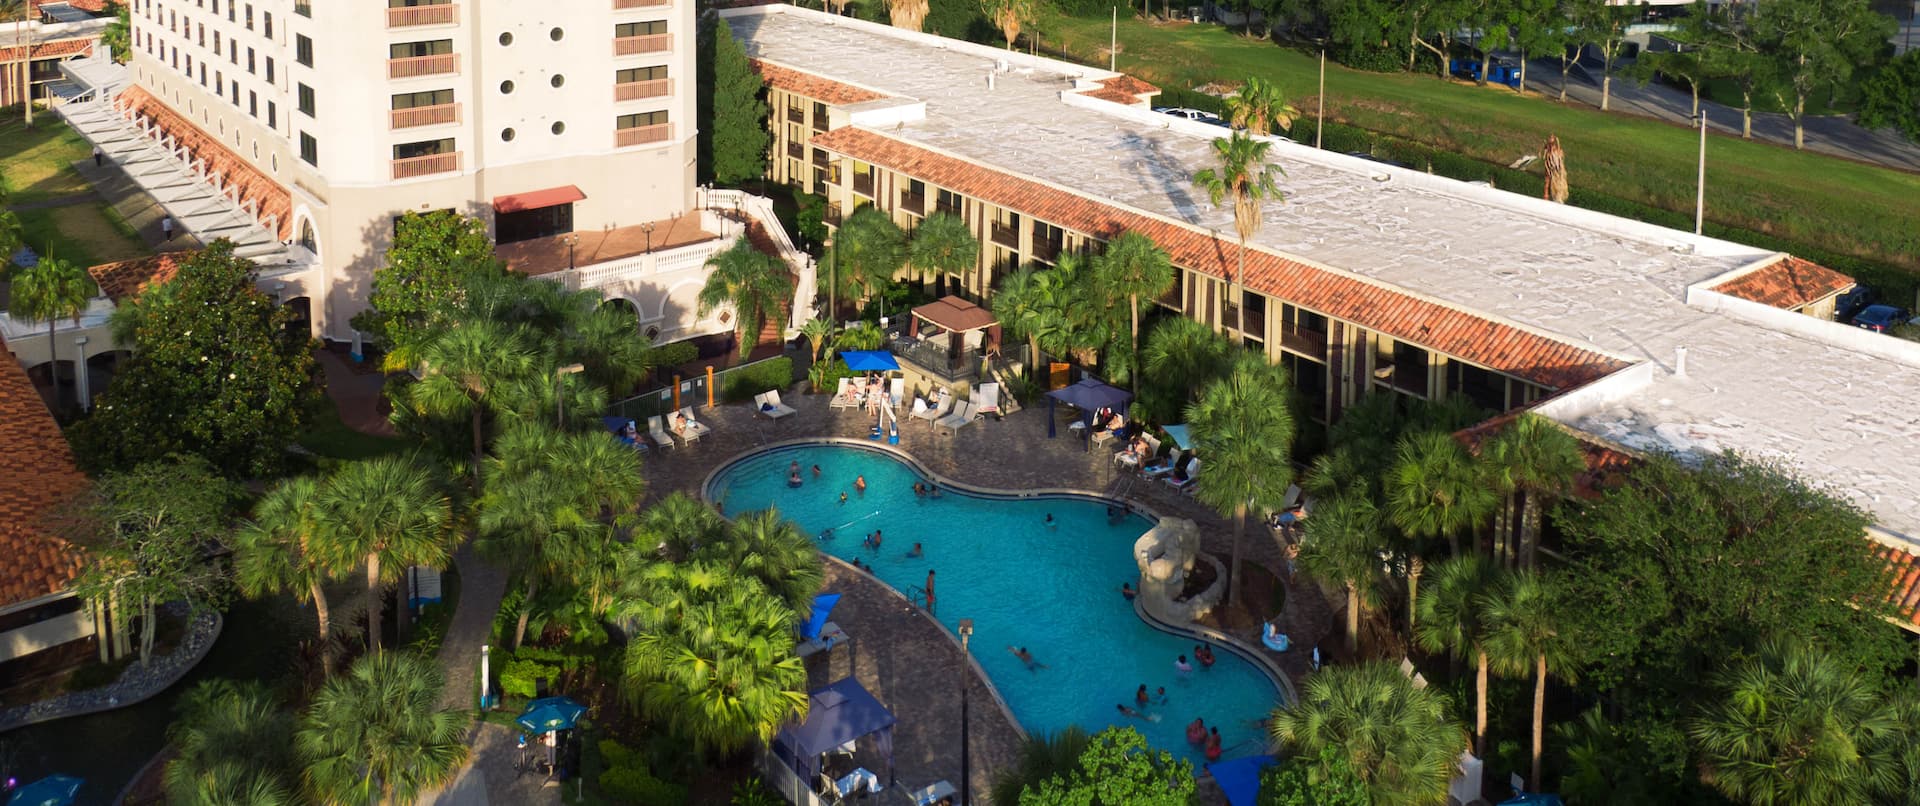 Aerial View of Hotel Tower and Lagoon Pool